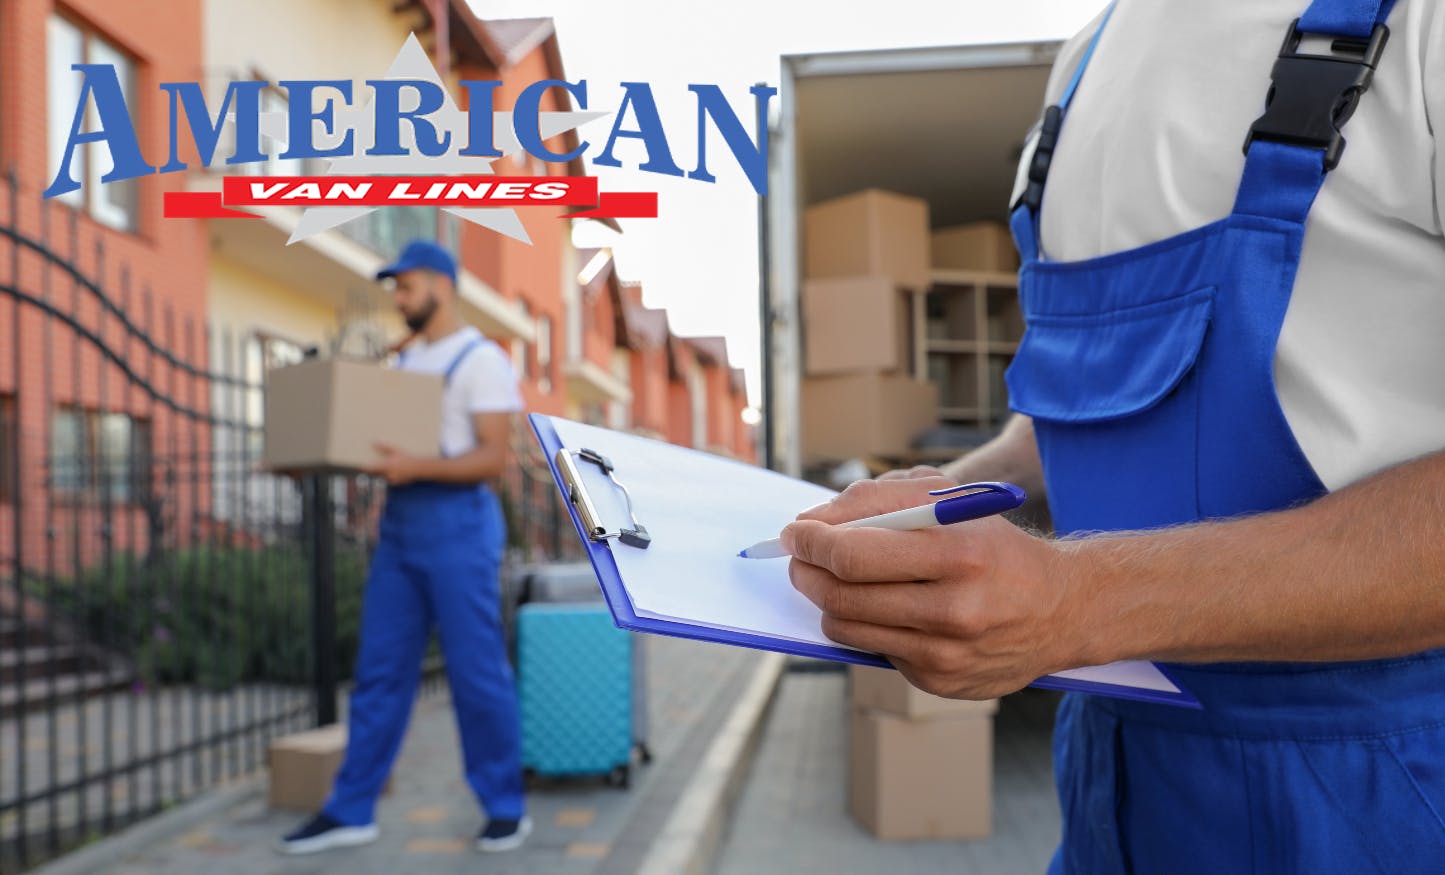 American Van Lines: Comprehensive Moving Services Review